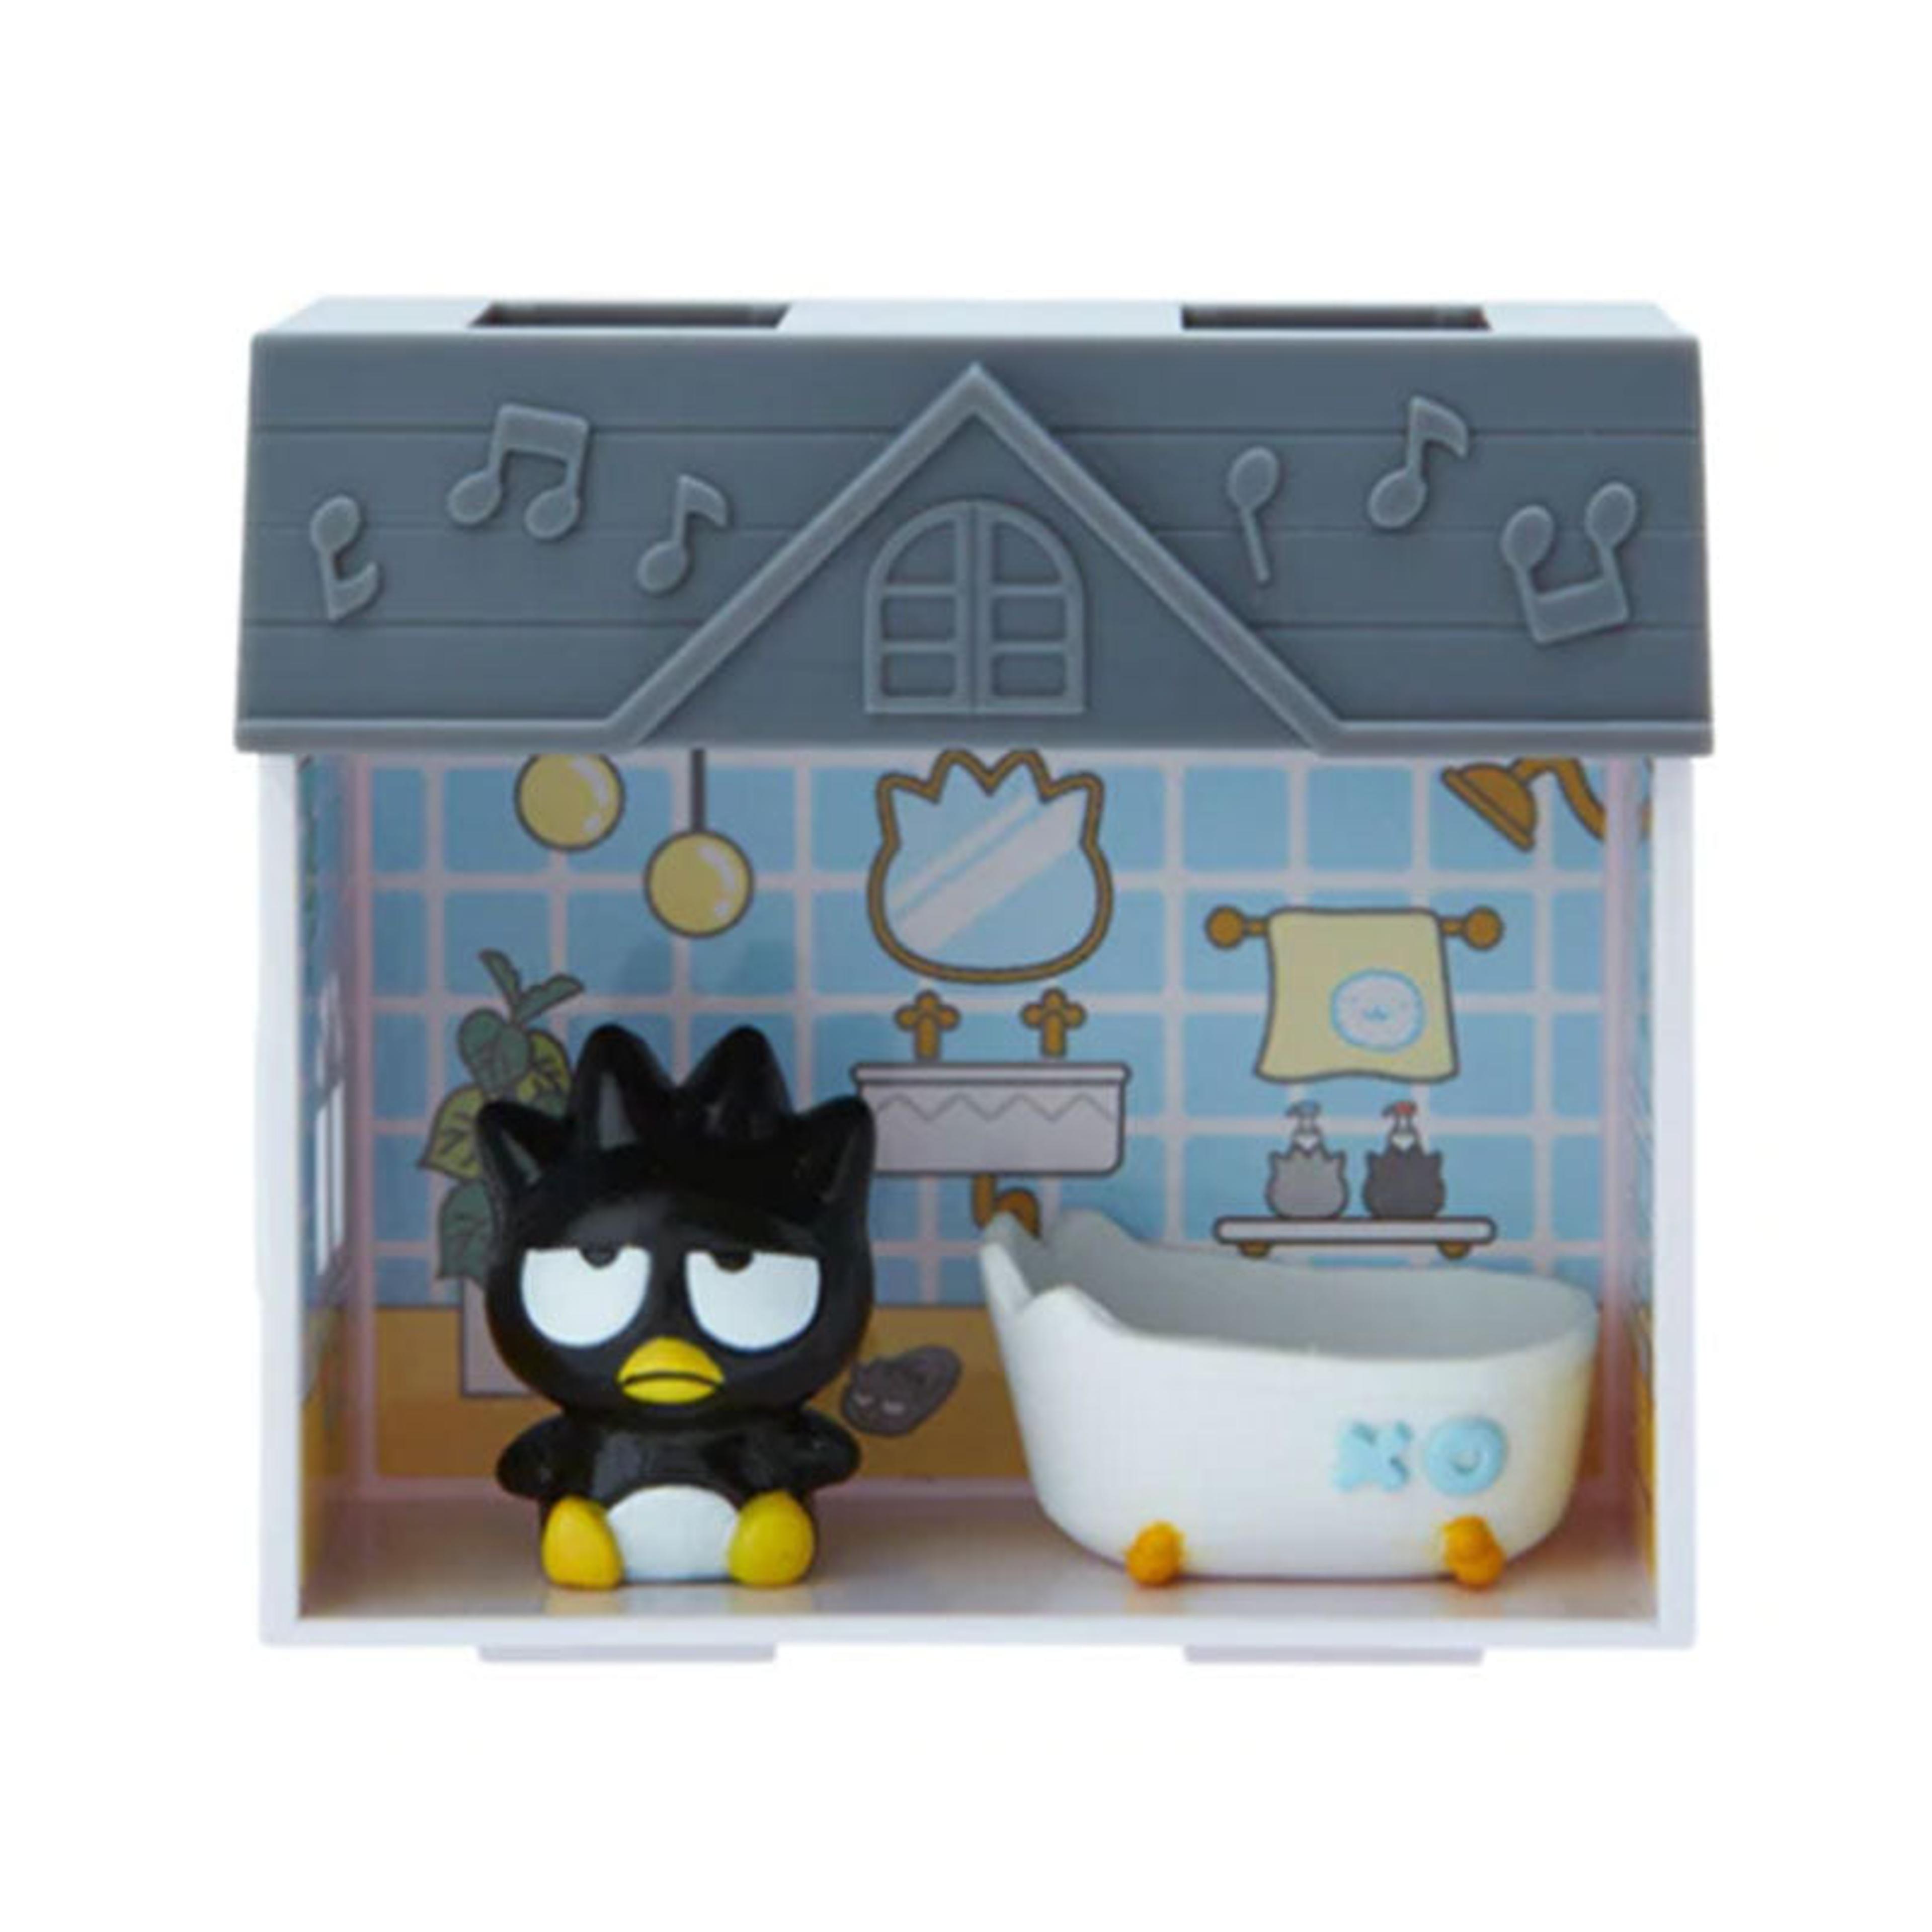 Alternate View 7 of Sanrio Characters Miniature House